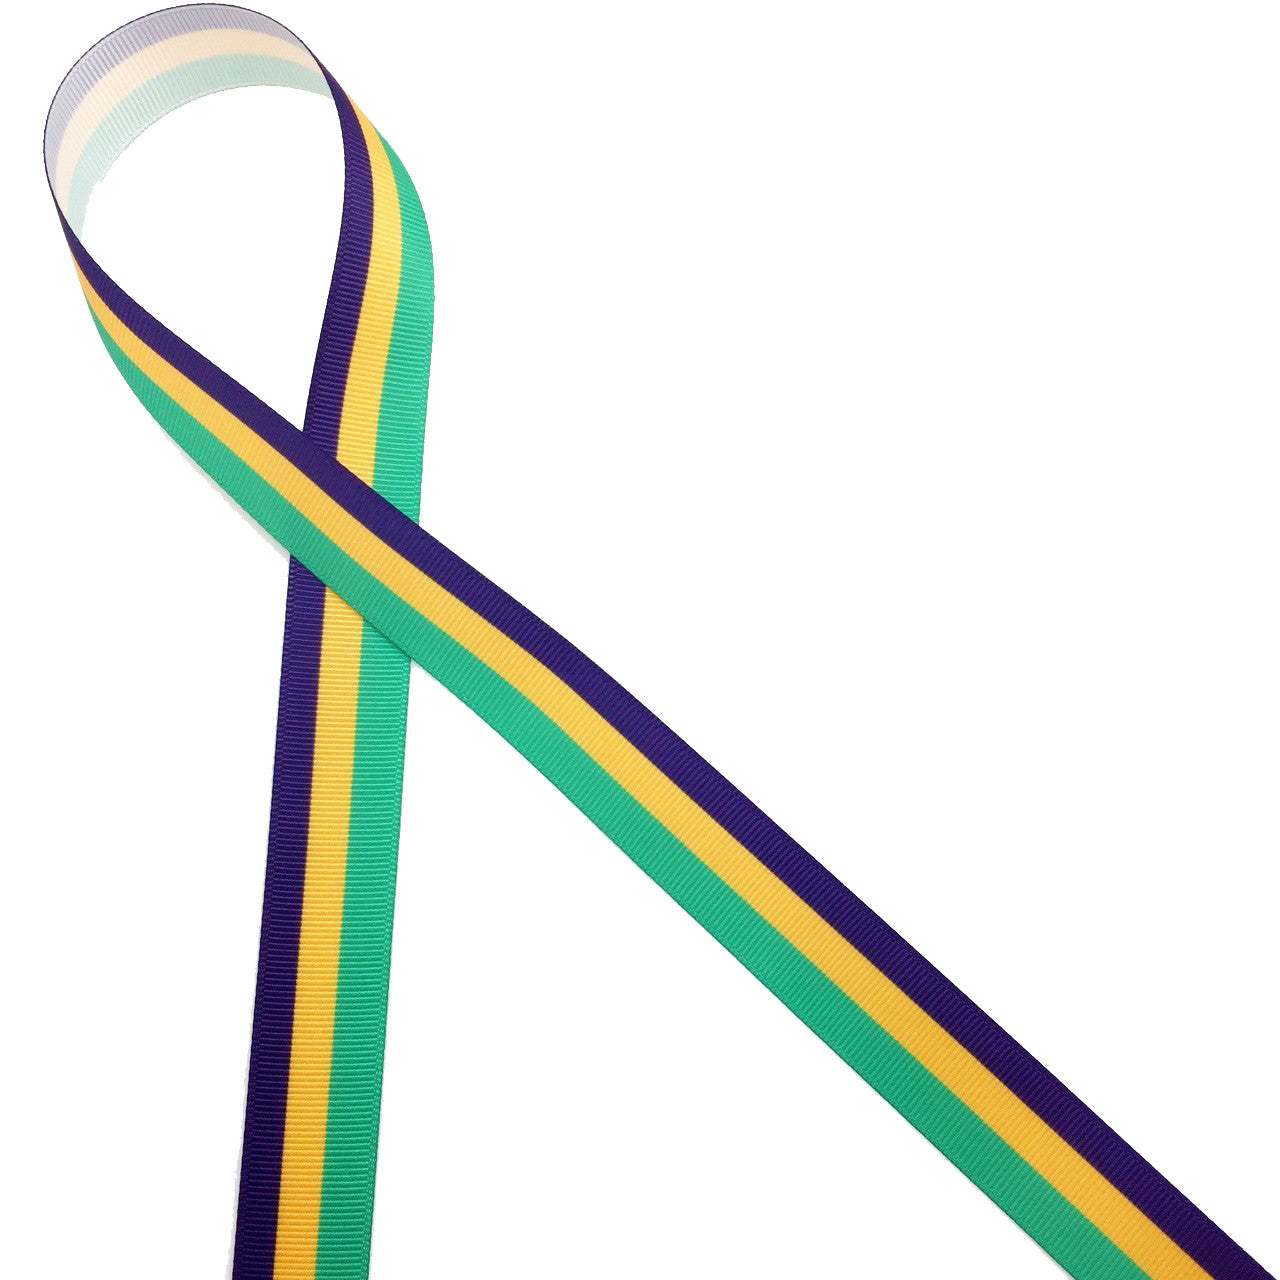 Stripes of green yellow and purple on 7/8" white grosgrain ribbon makes an ideal accent ribbon for your Mardi Gras events! This is an ideal ribbon for gift wrap, gift baskets, party decor, wreath making, cookies, cakek pops, quilting and craft projects honoring the Fat Tuesday tradition. All our ribbon is designed and printed in the USA